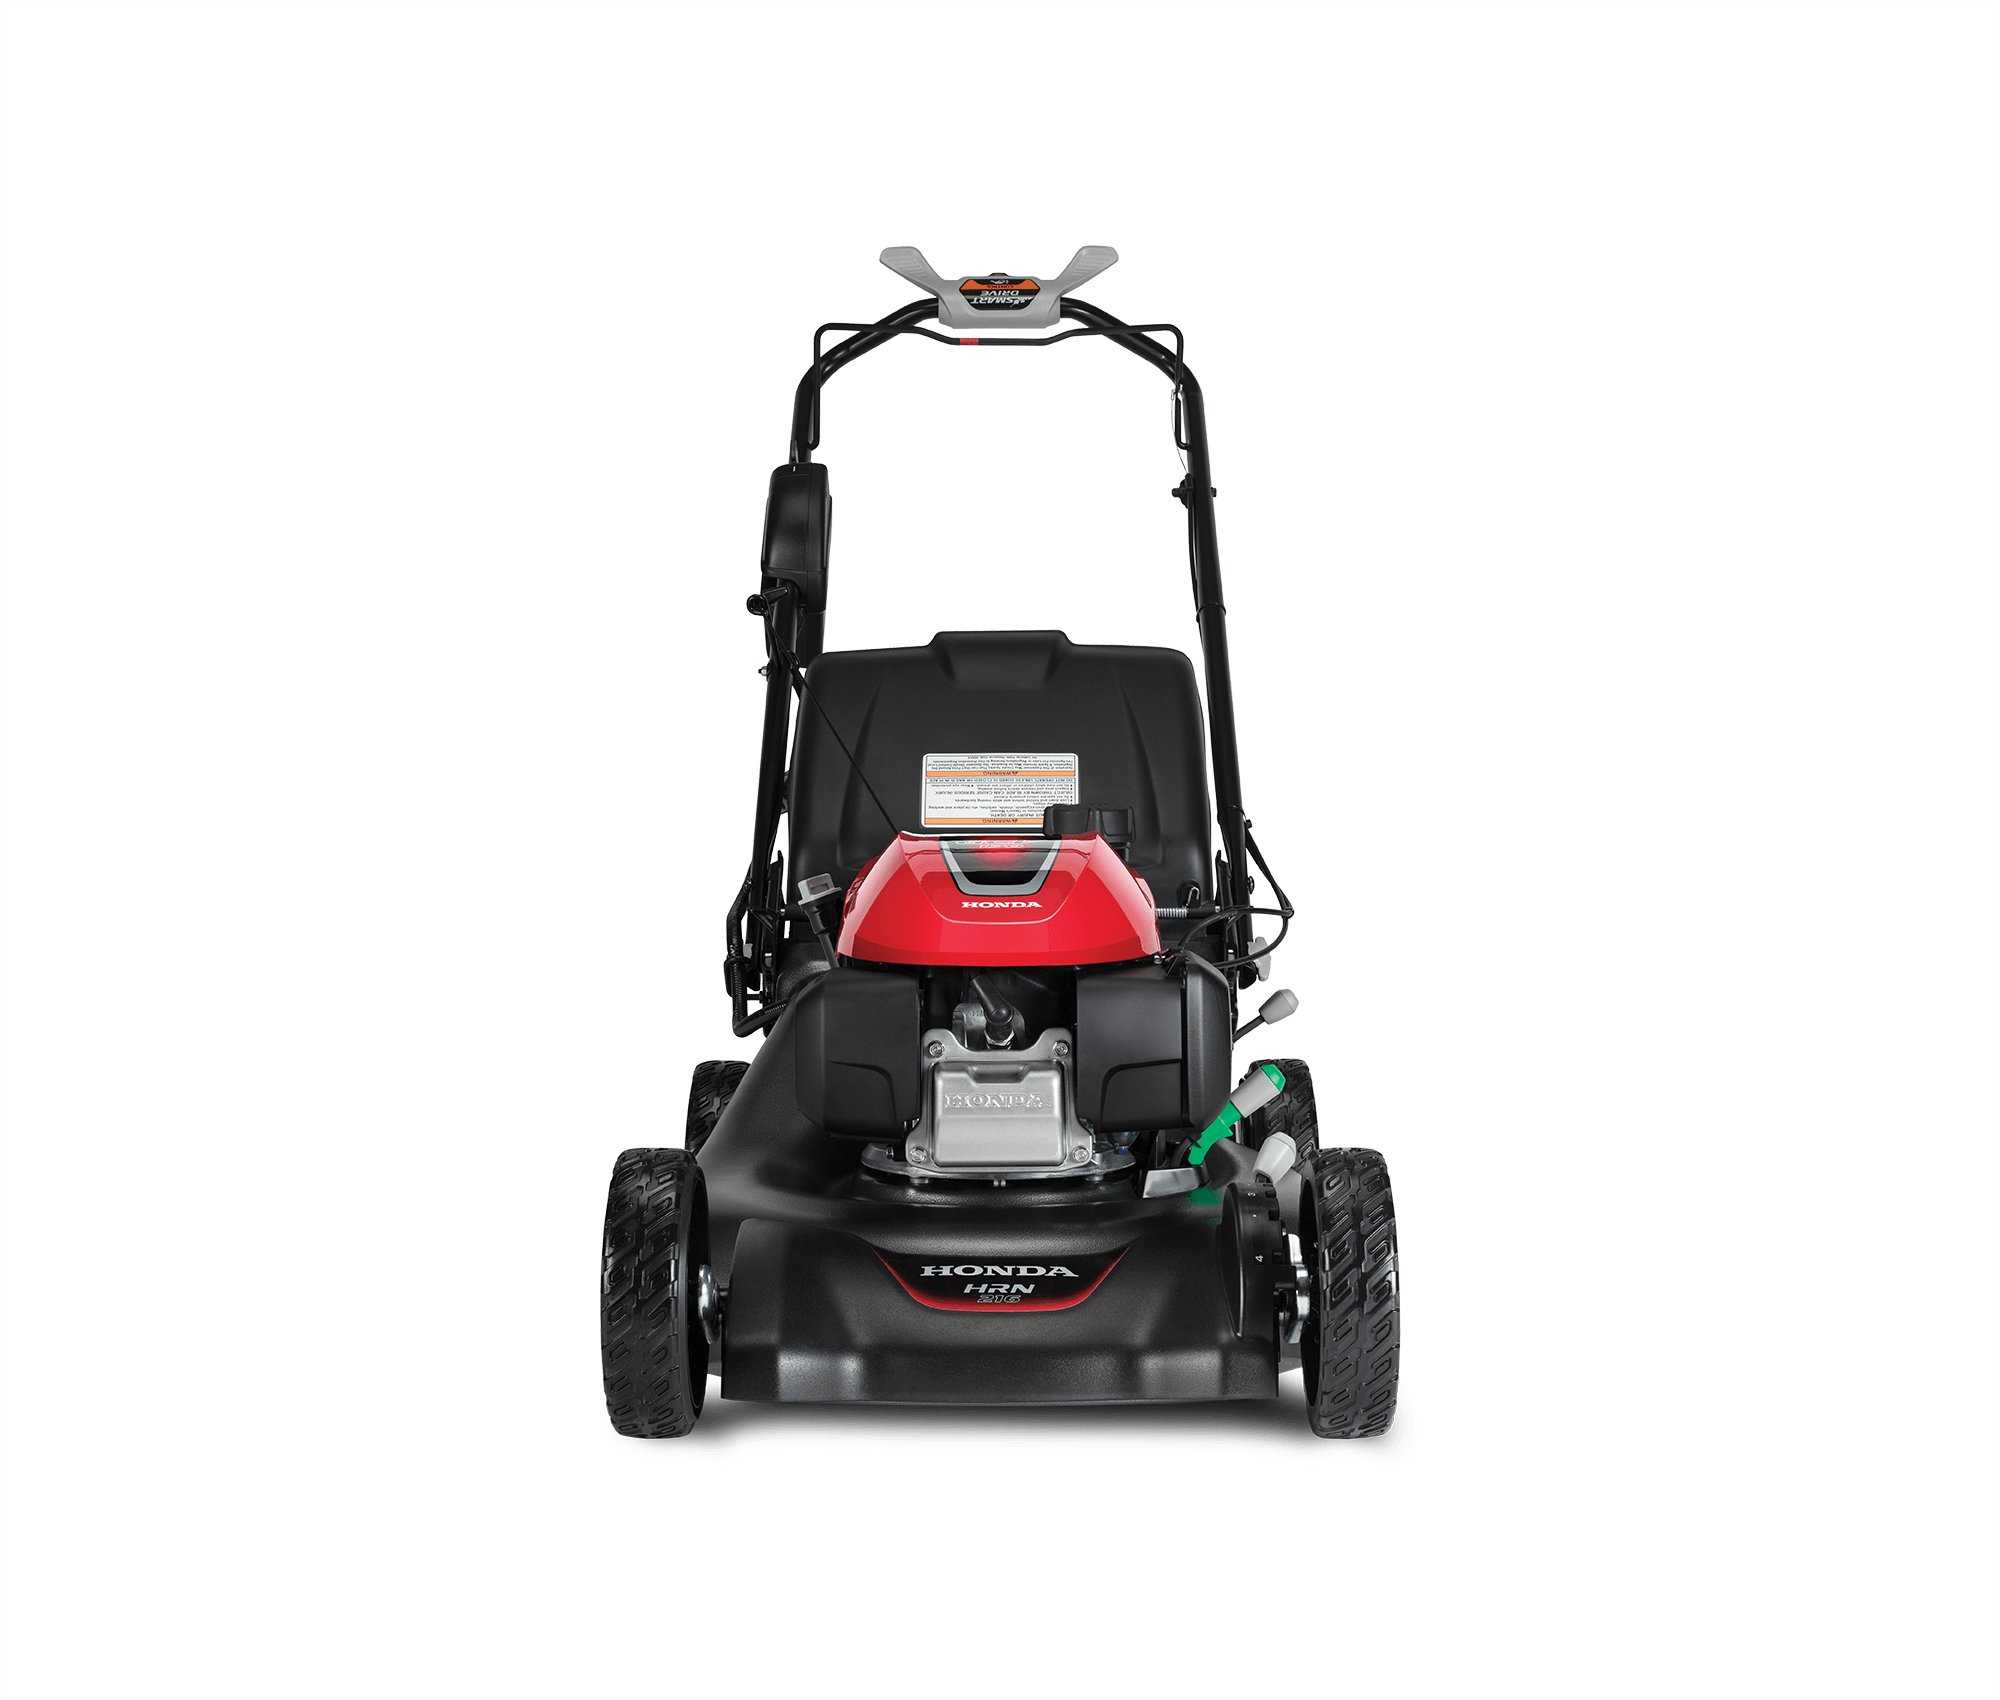 Image of the HRN Smart-Drive Electric Start Lawn Mower